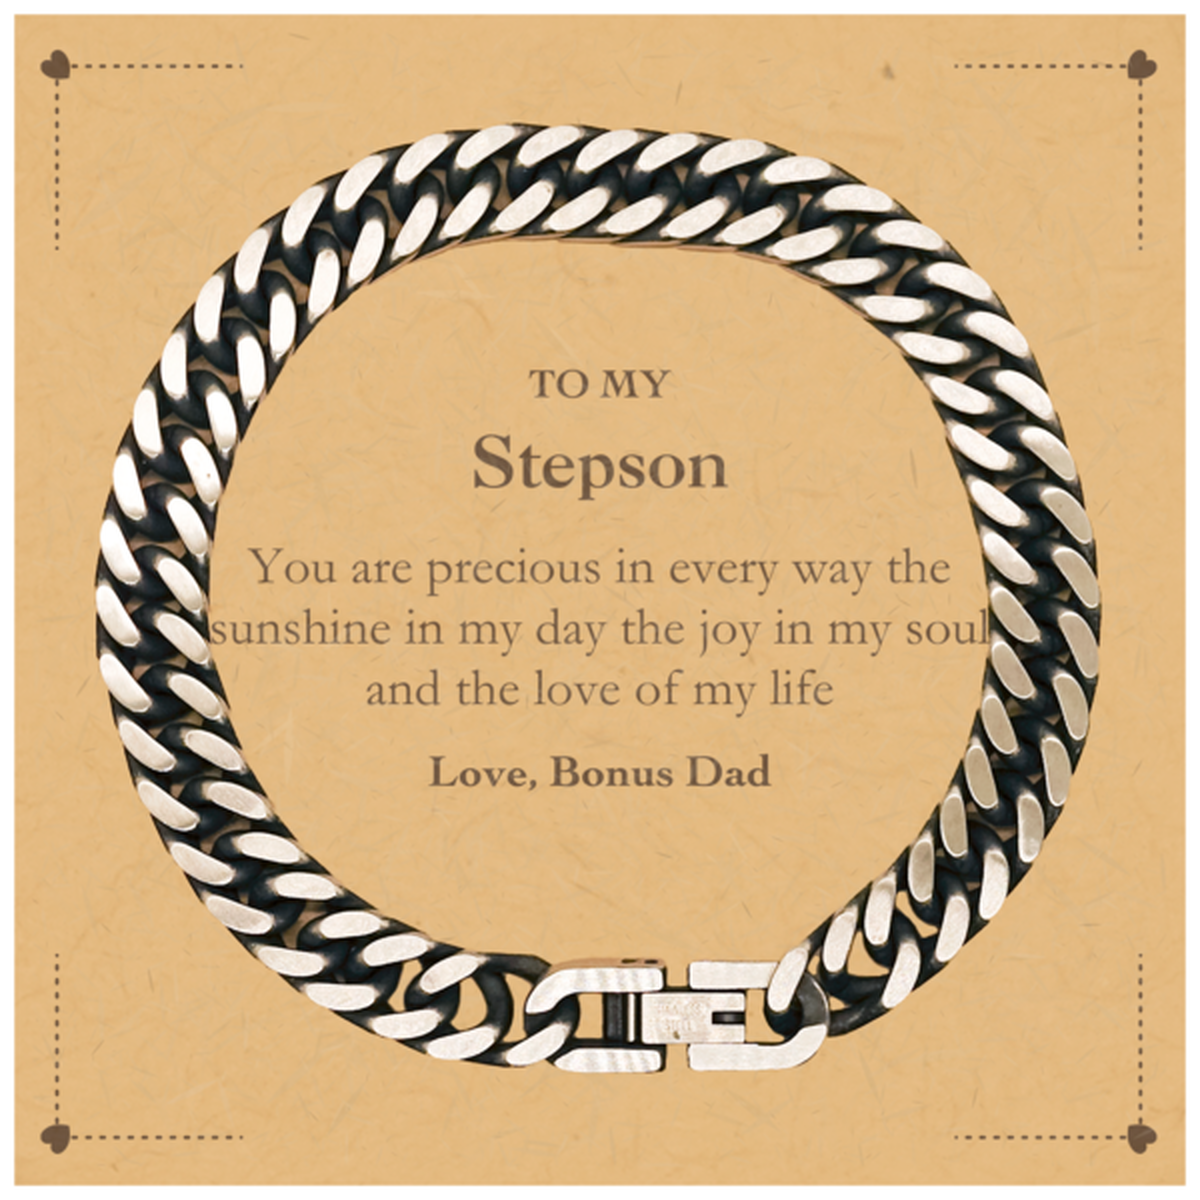 Graduation Gifts for Stepson Cuban Link Chain Bracelet Present from Bonus Dad, Christmas Stepson Birthday Gifts Stepson You are precious in every way the sunshine in my day. Love, Bonus Dad